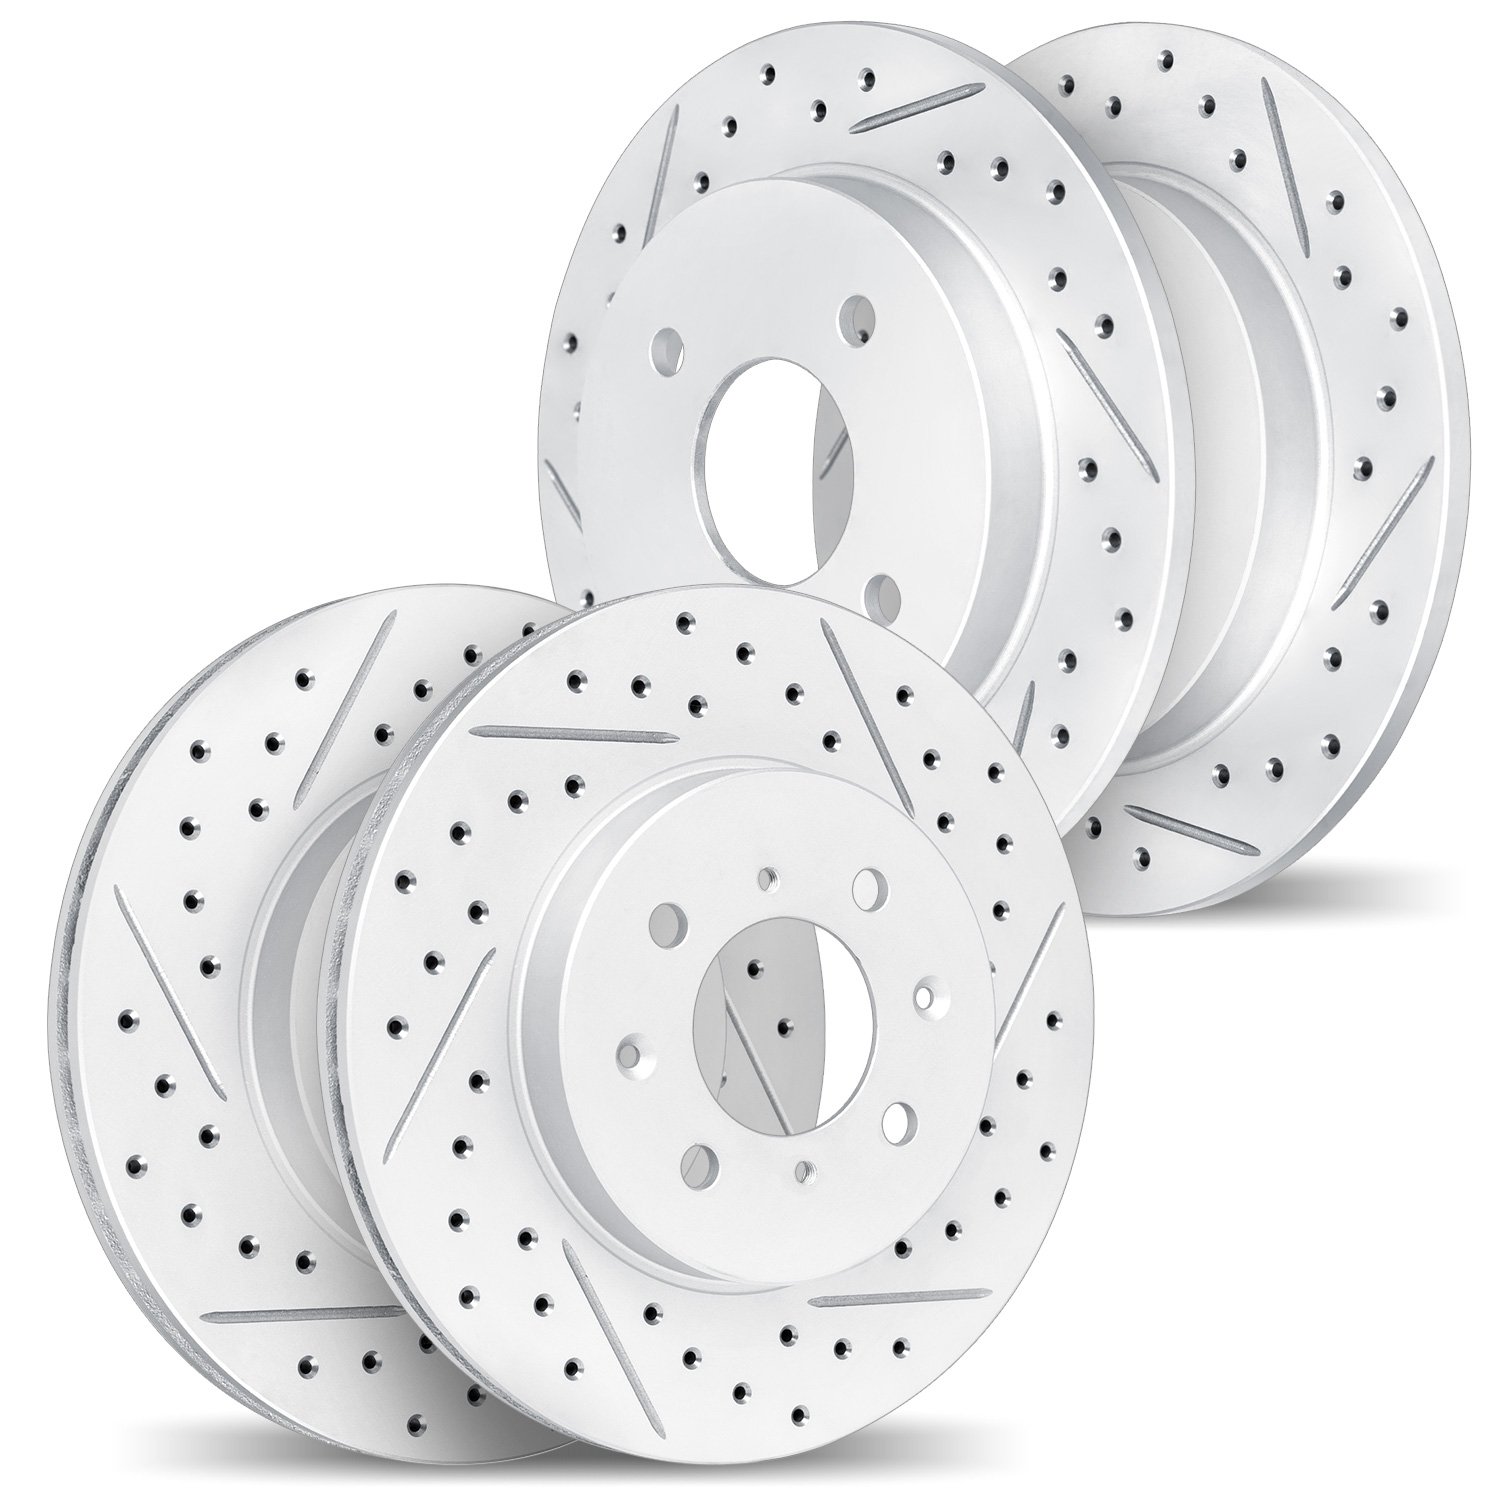 2004-76077 Geoperformance Drilled/Slotted Brake Rotors, 2012-2018 Lexus/Toyota/Scion, Position: Front and Rear